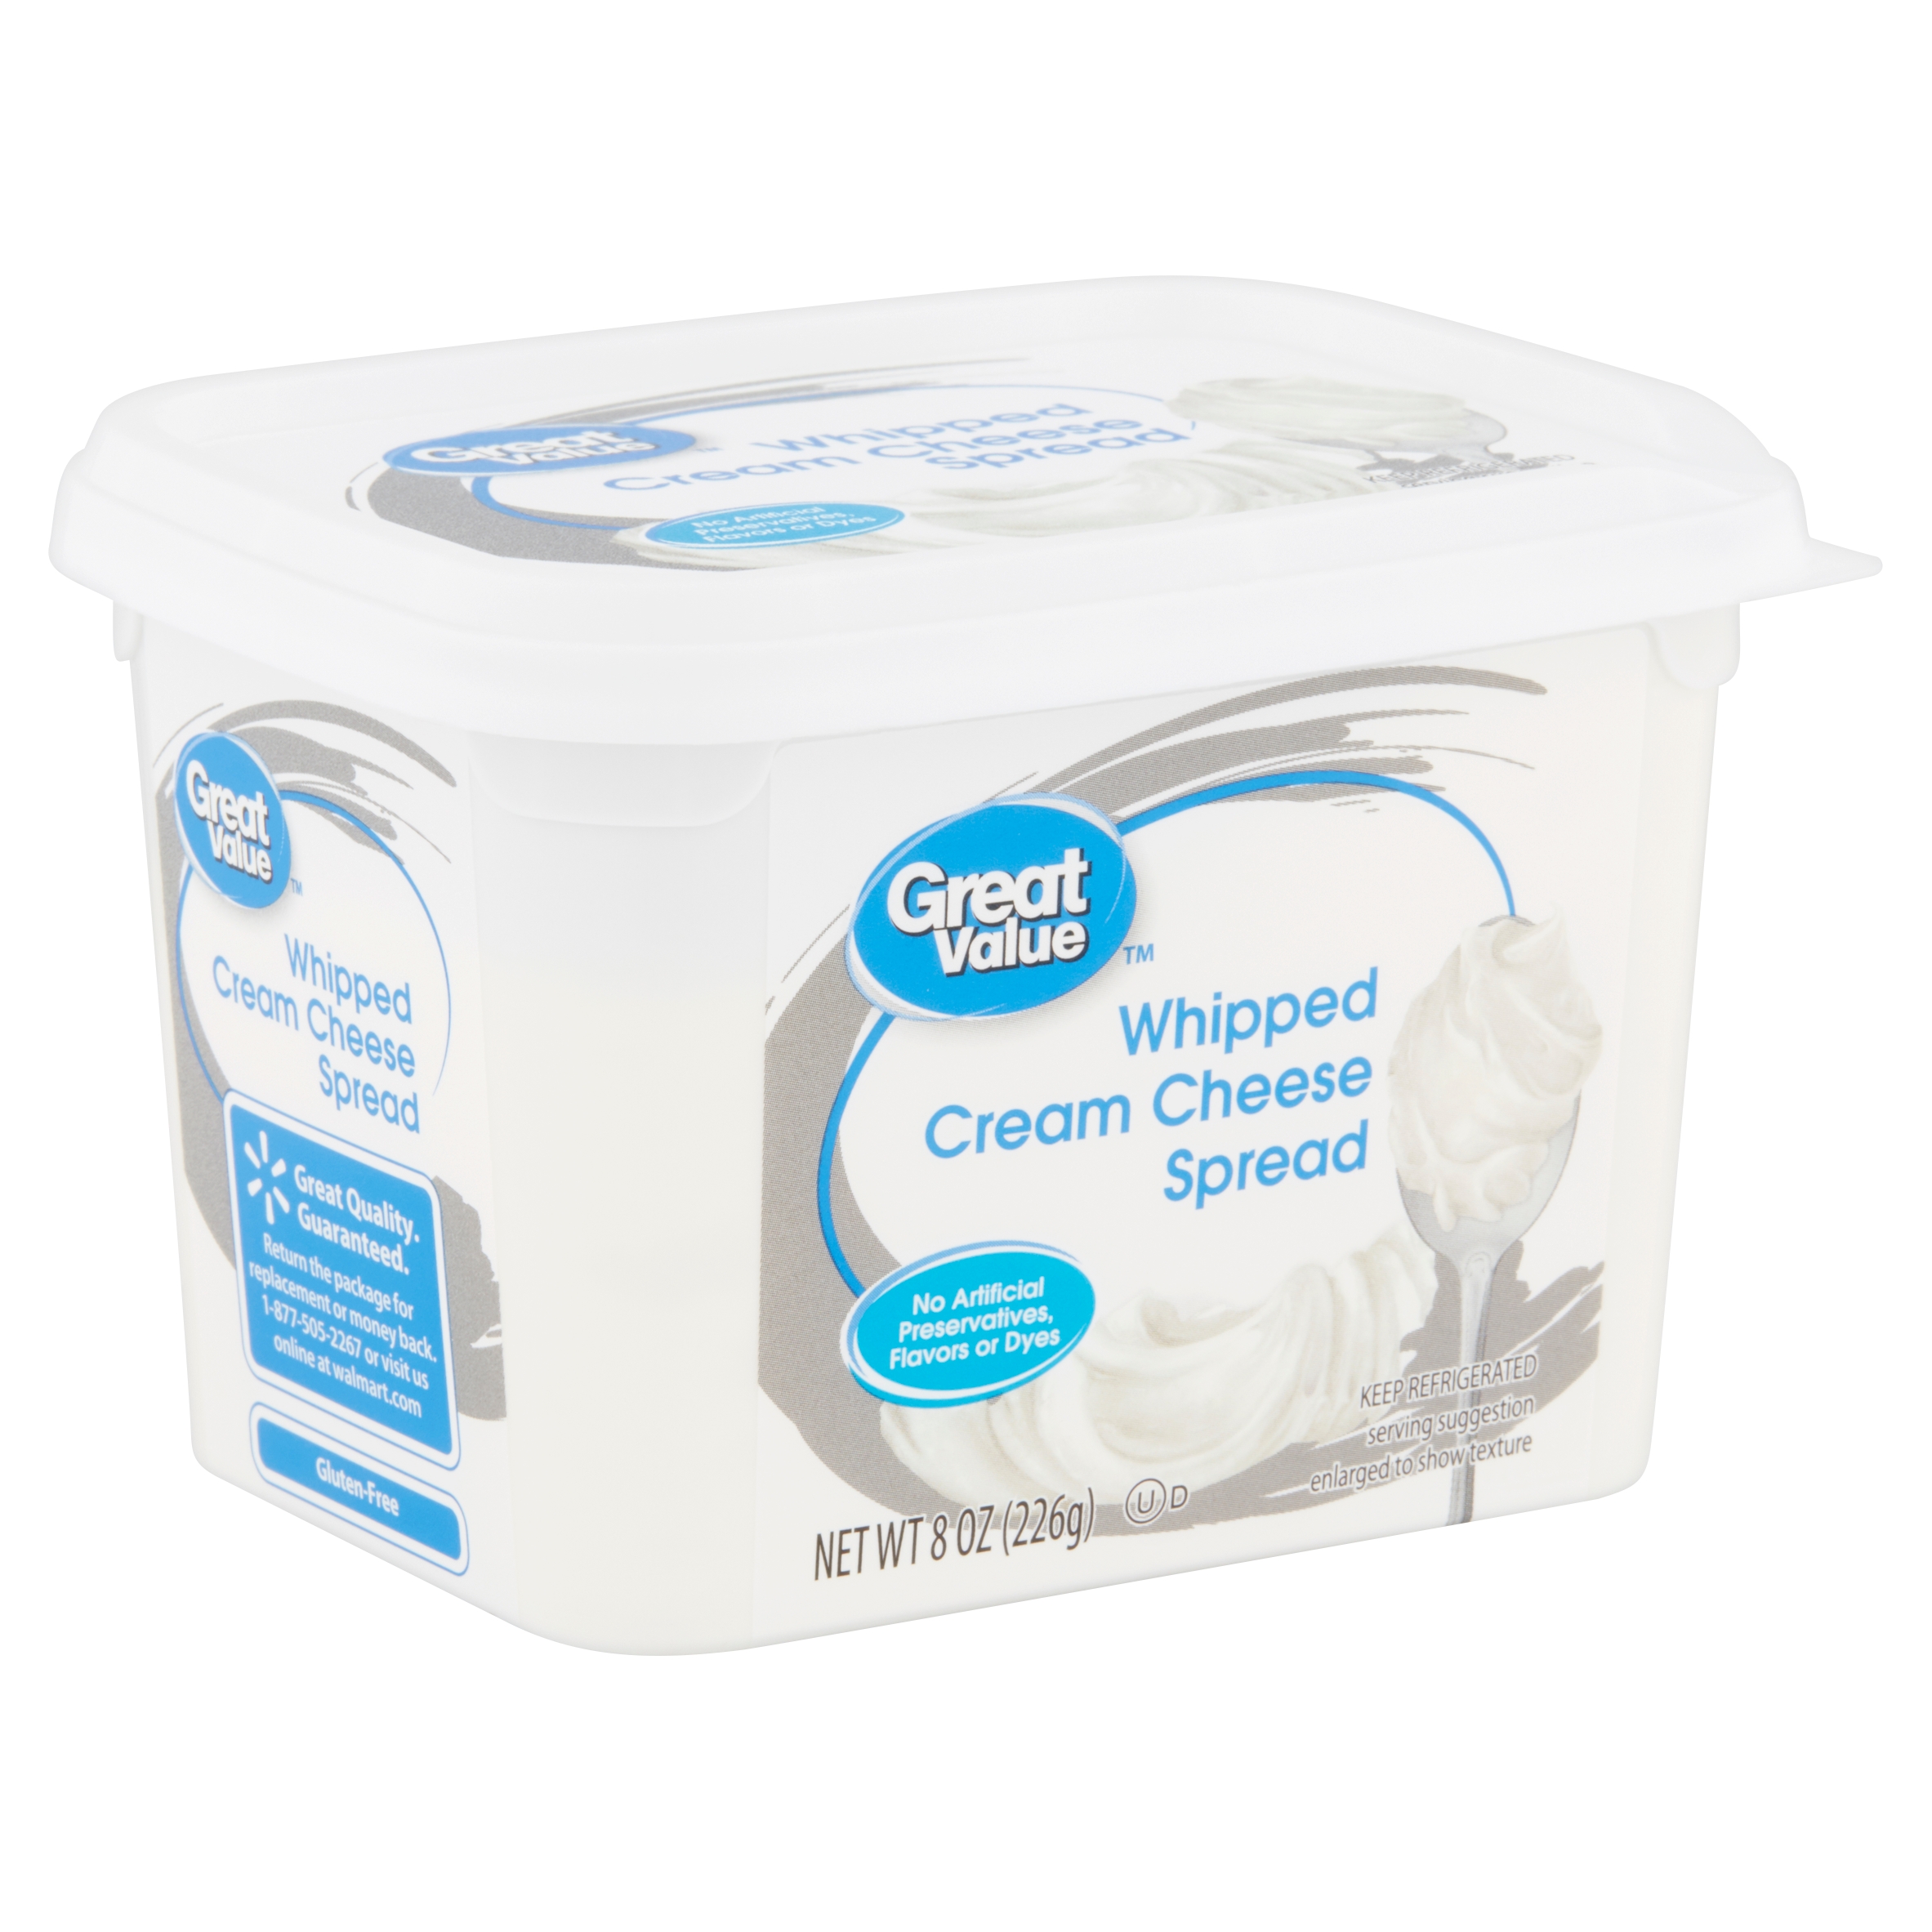 Great Value Whipped Cream Cheese Spread, 8 Oz Image